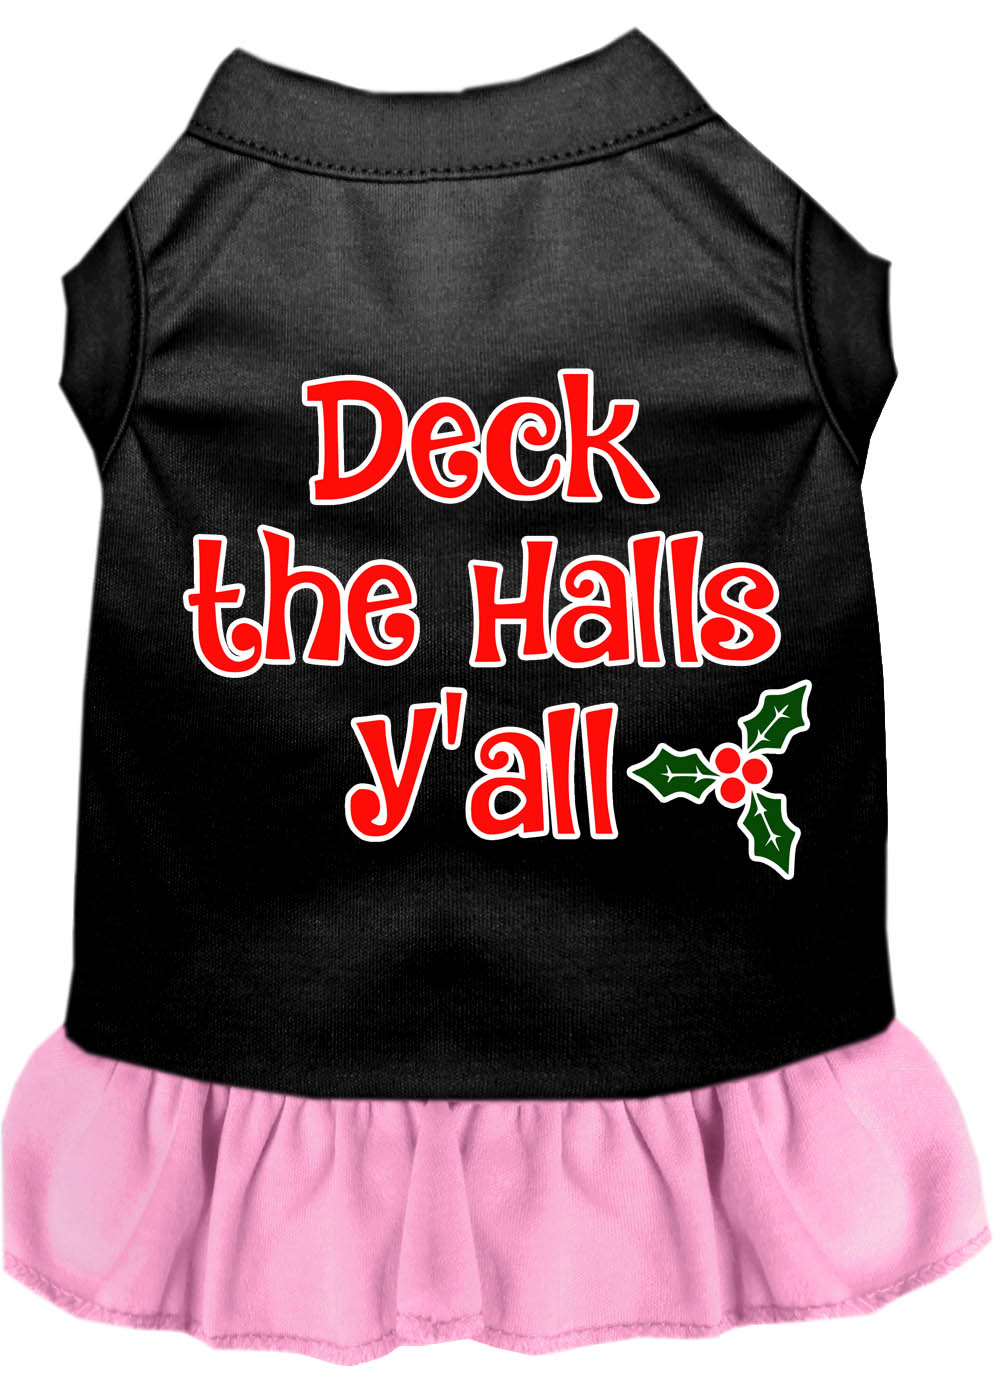 Deck the Halls Y'all Screen Print Dog Dress Black with Light Pink Sm